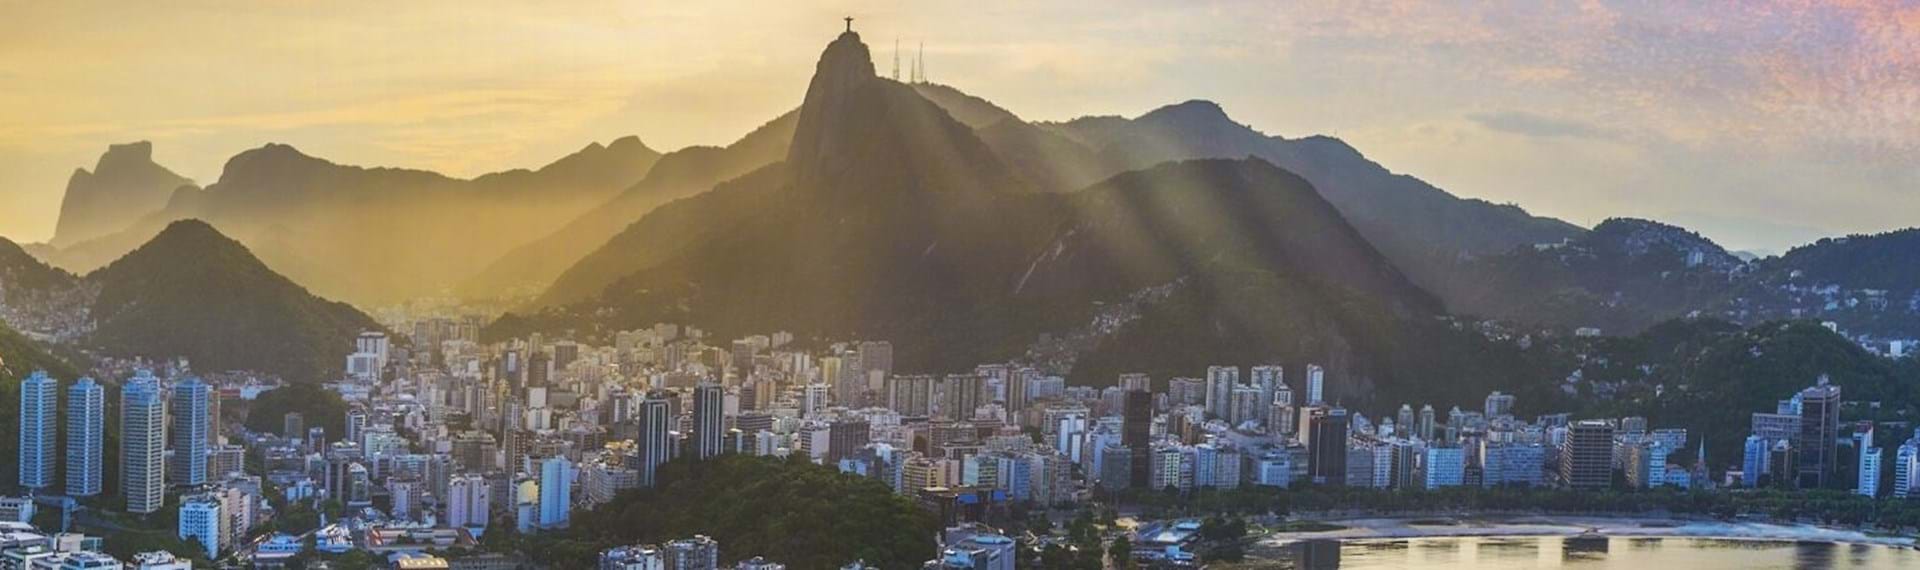 Holidays to Brazil Escorted Tours & Package Holidays 2021 / 2022